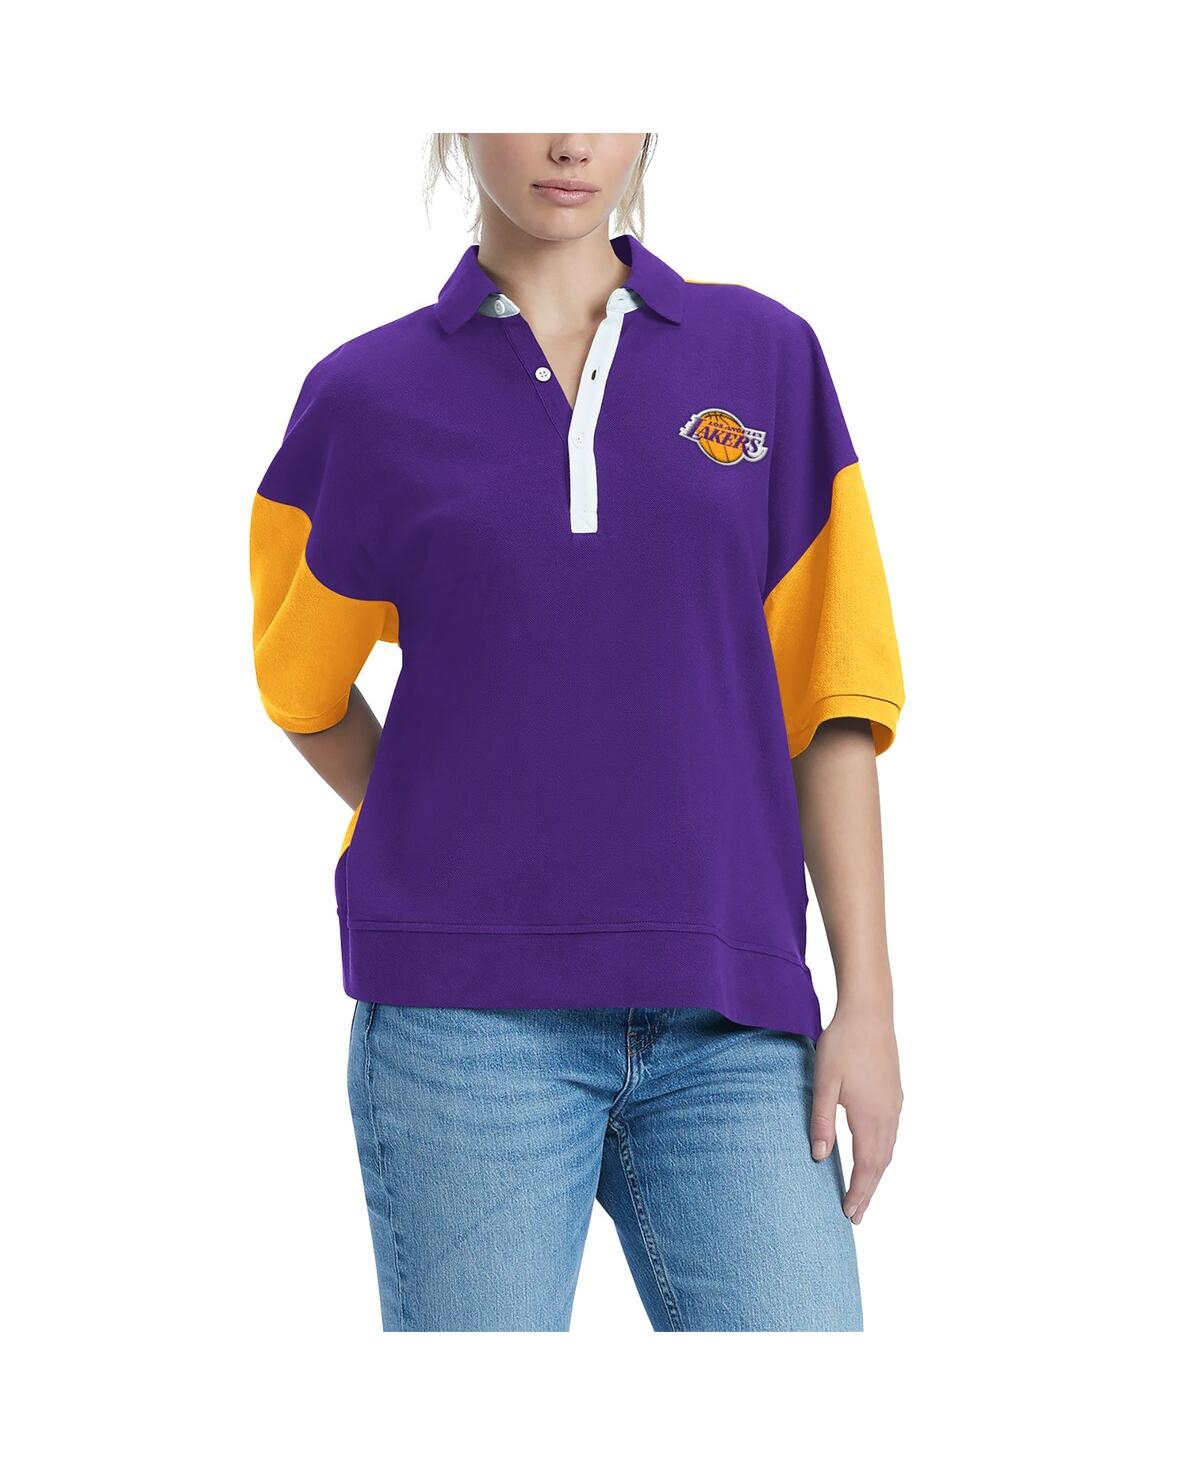 TOMMY JEANS WOMEN'S TOMMY JEANS PURPLE LOS ANGELES LAKERS TAYA PUFF SLEEVE PIQUE POLO SHIRT